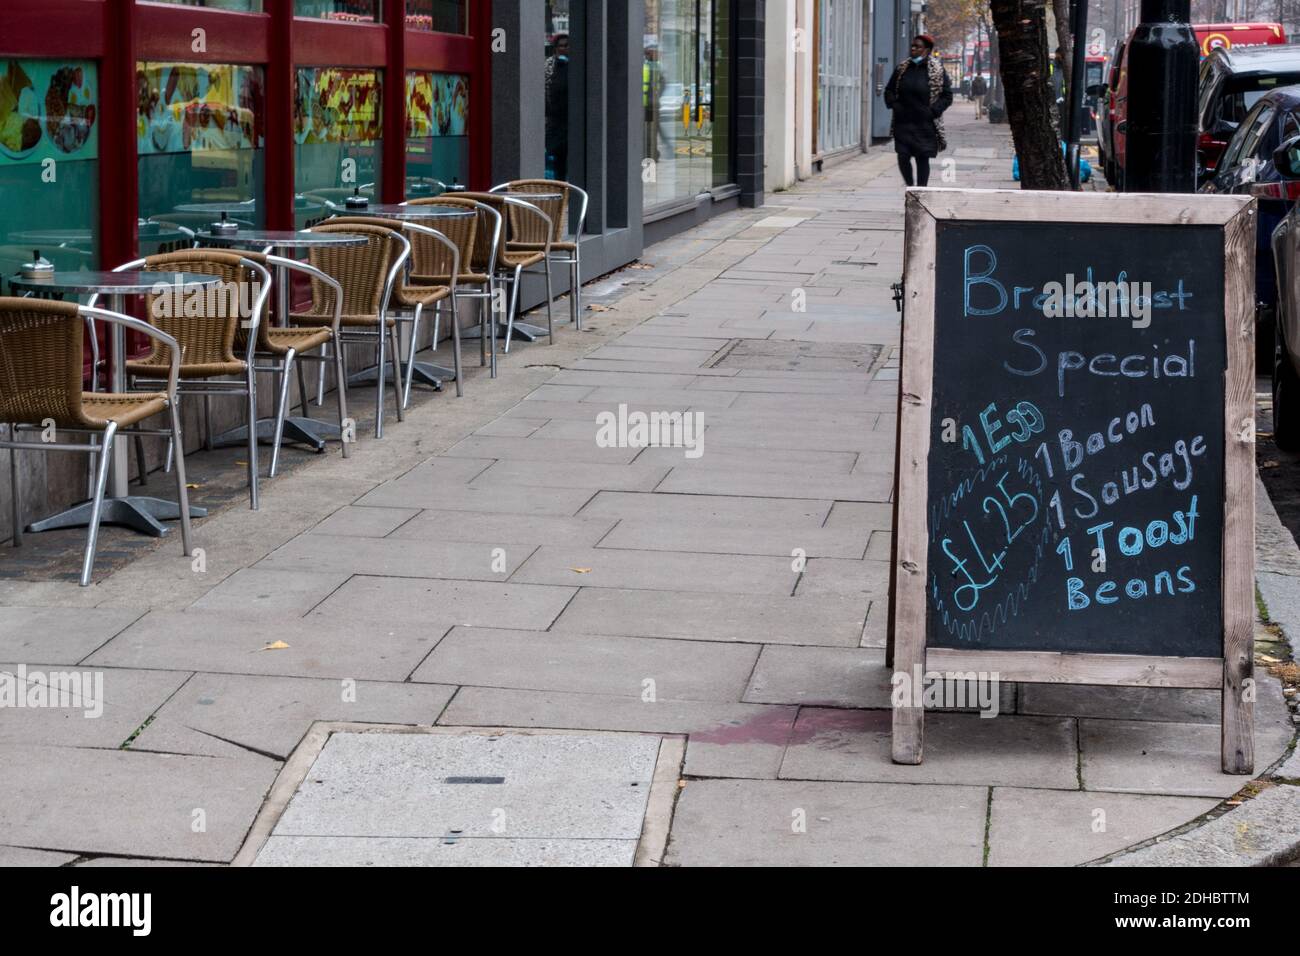 London food cafe outdoor seating Stock Photo